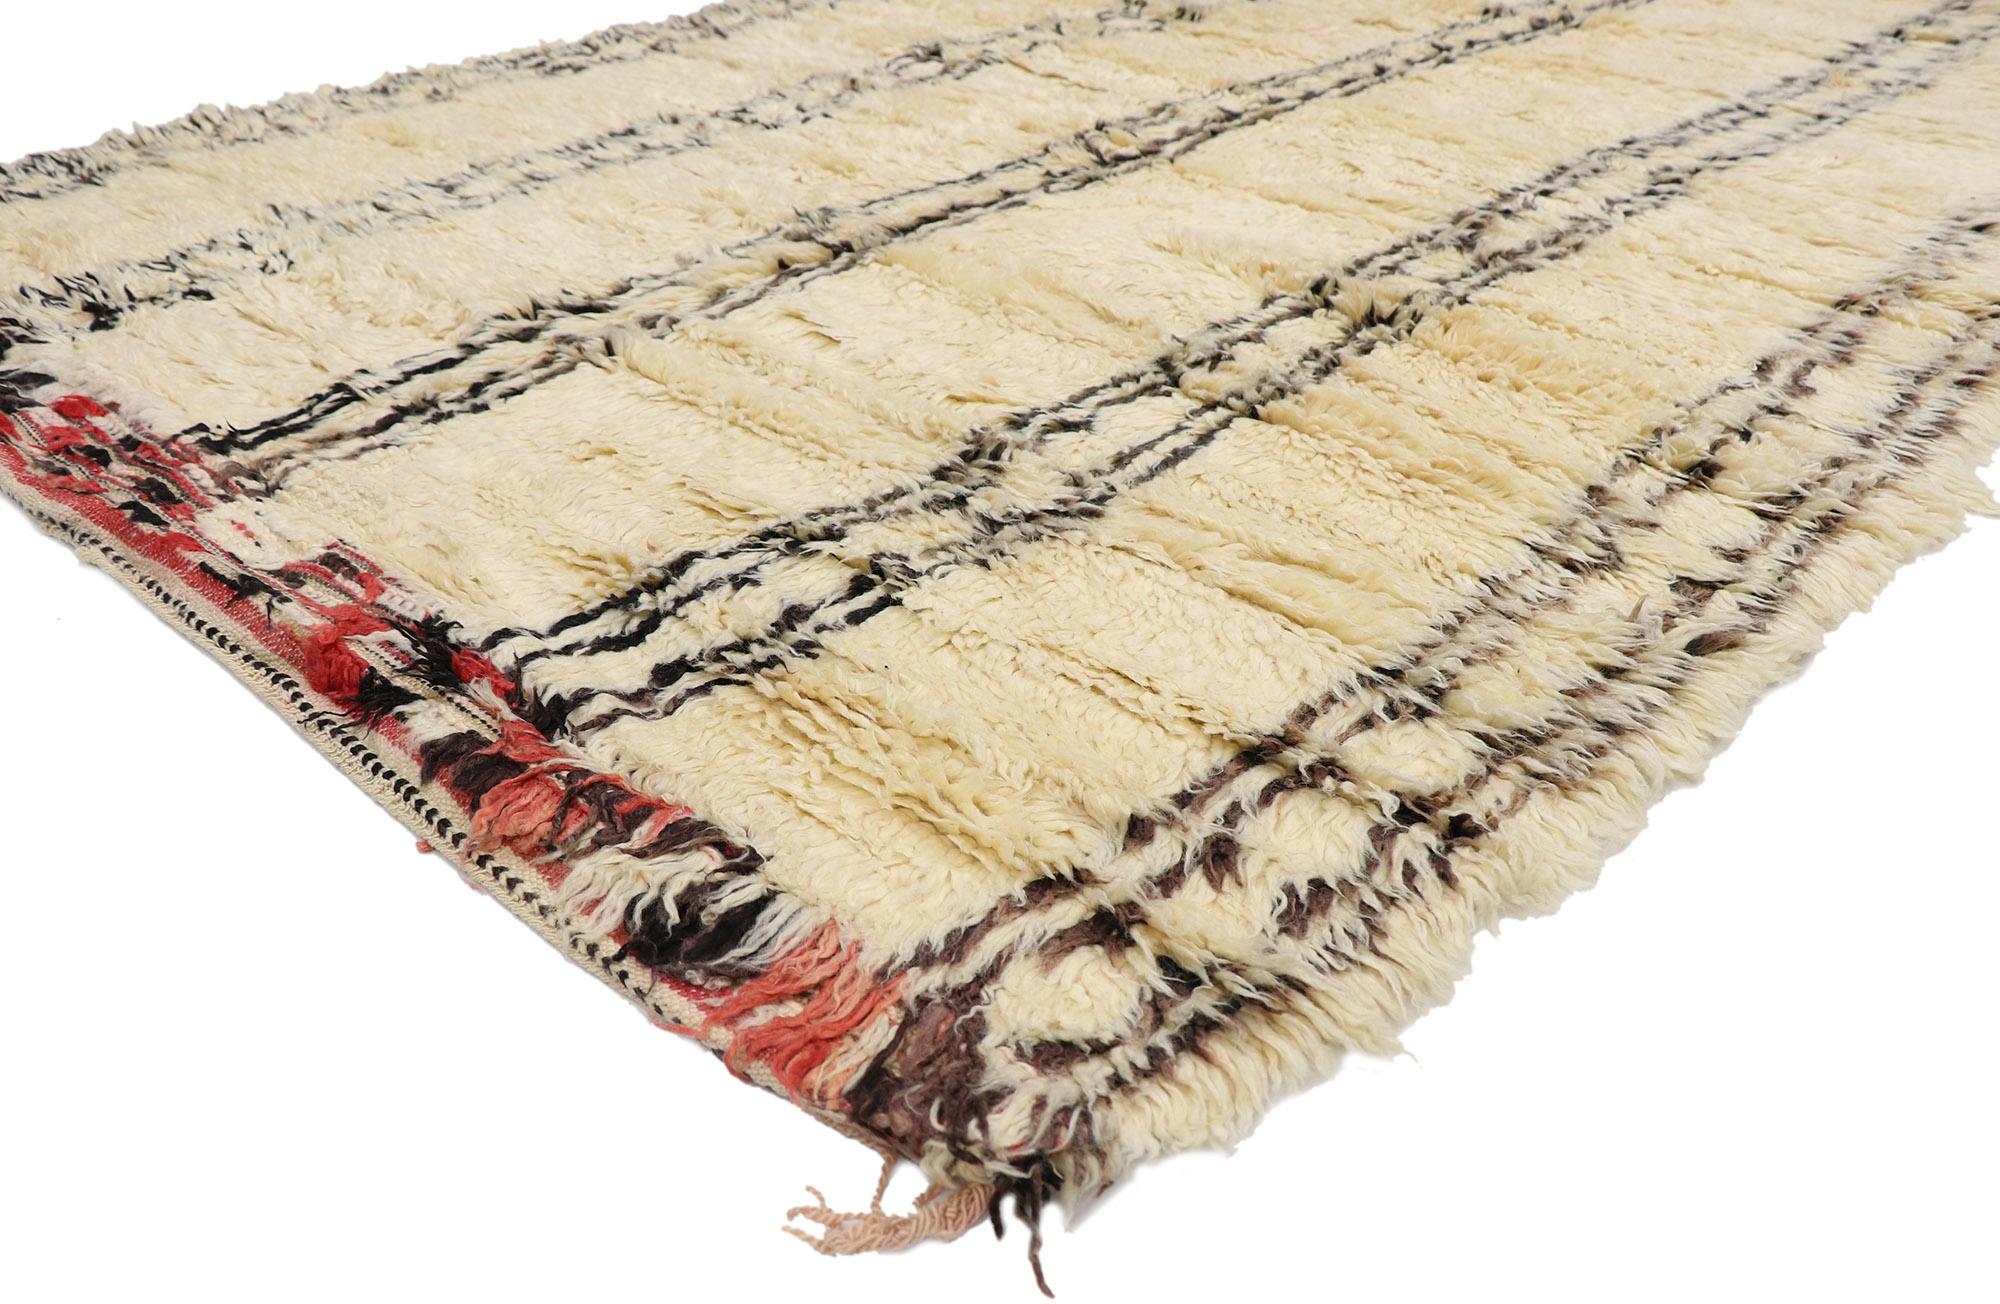 21377 Vintage Berber Beni Ourain Moroccan rug with Mid-Century Modern Style 06'03 x 09'00. With its simplicity, plush pile and Mid-Century Modern style, this hand knotted wool vintage Beni Ourain Moroccan rug provides a feeling of cozy contentment